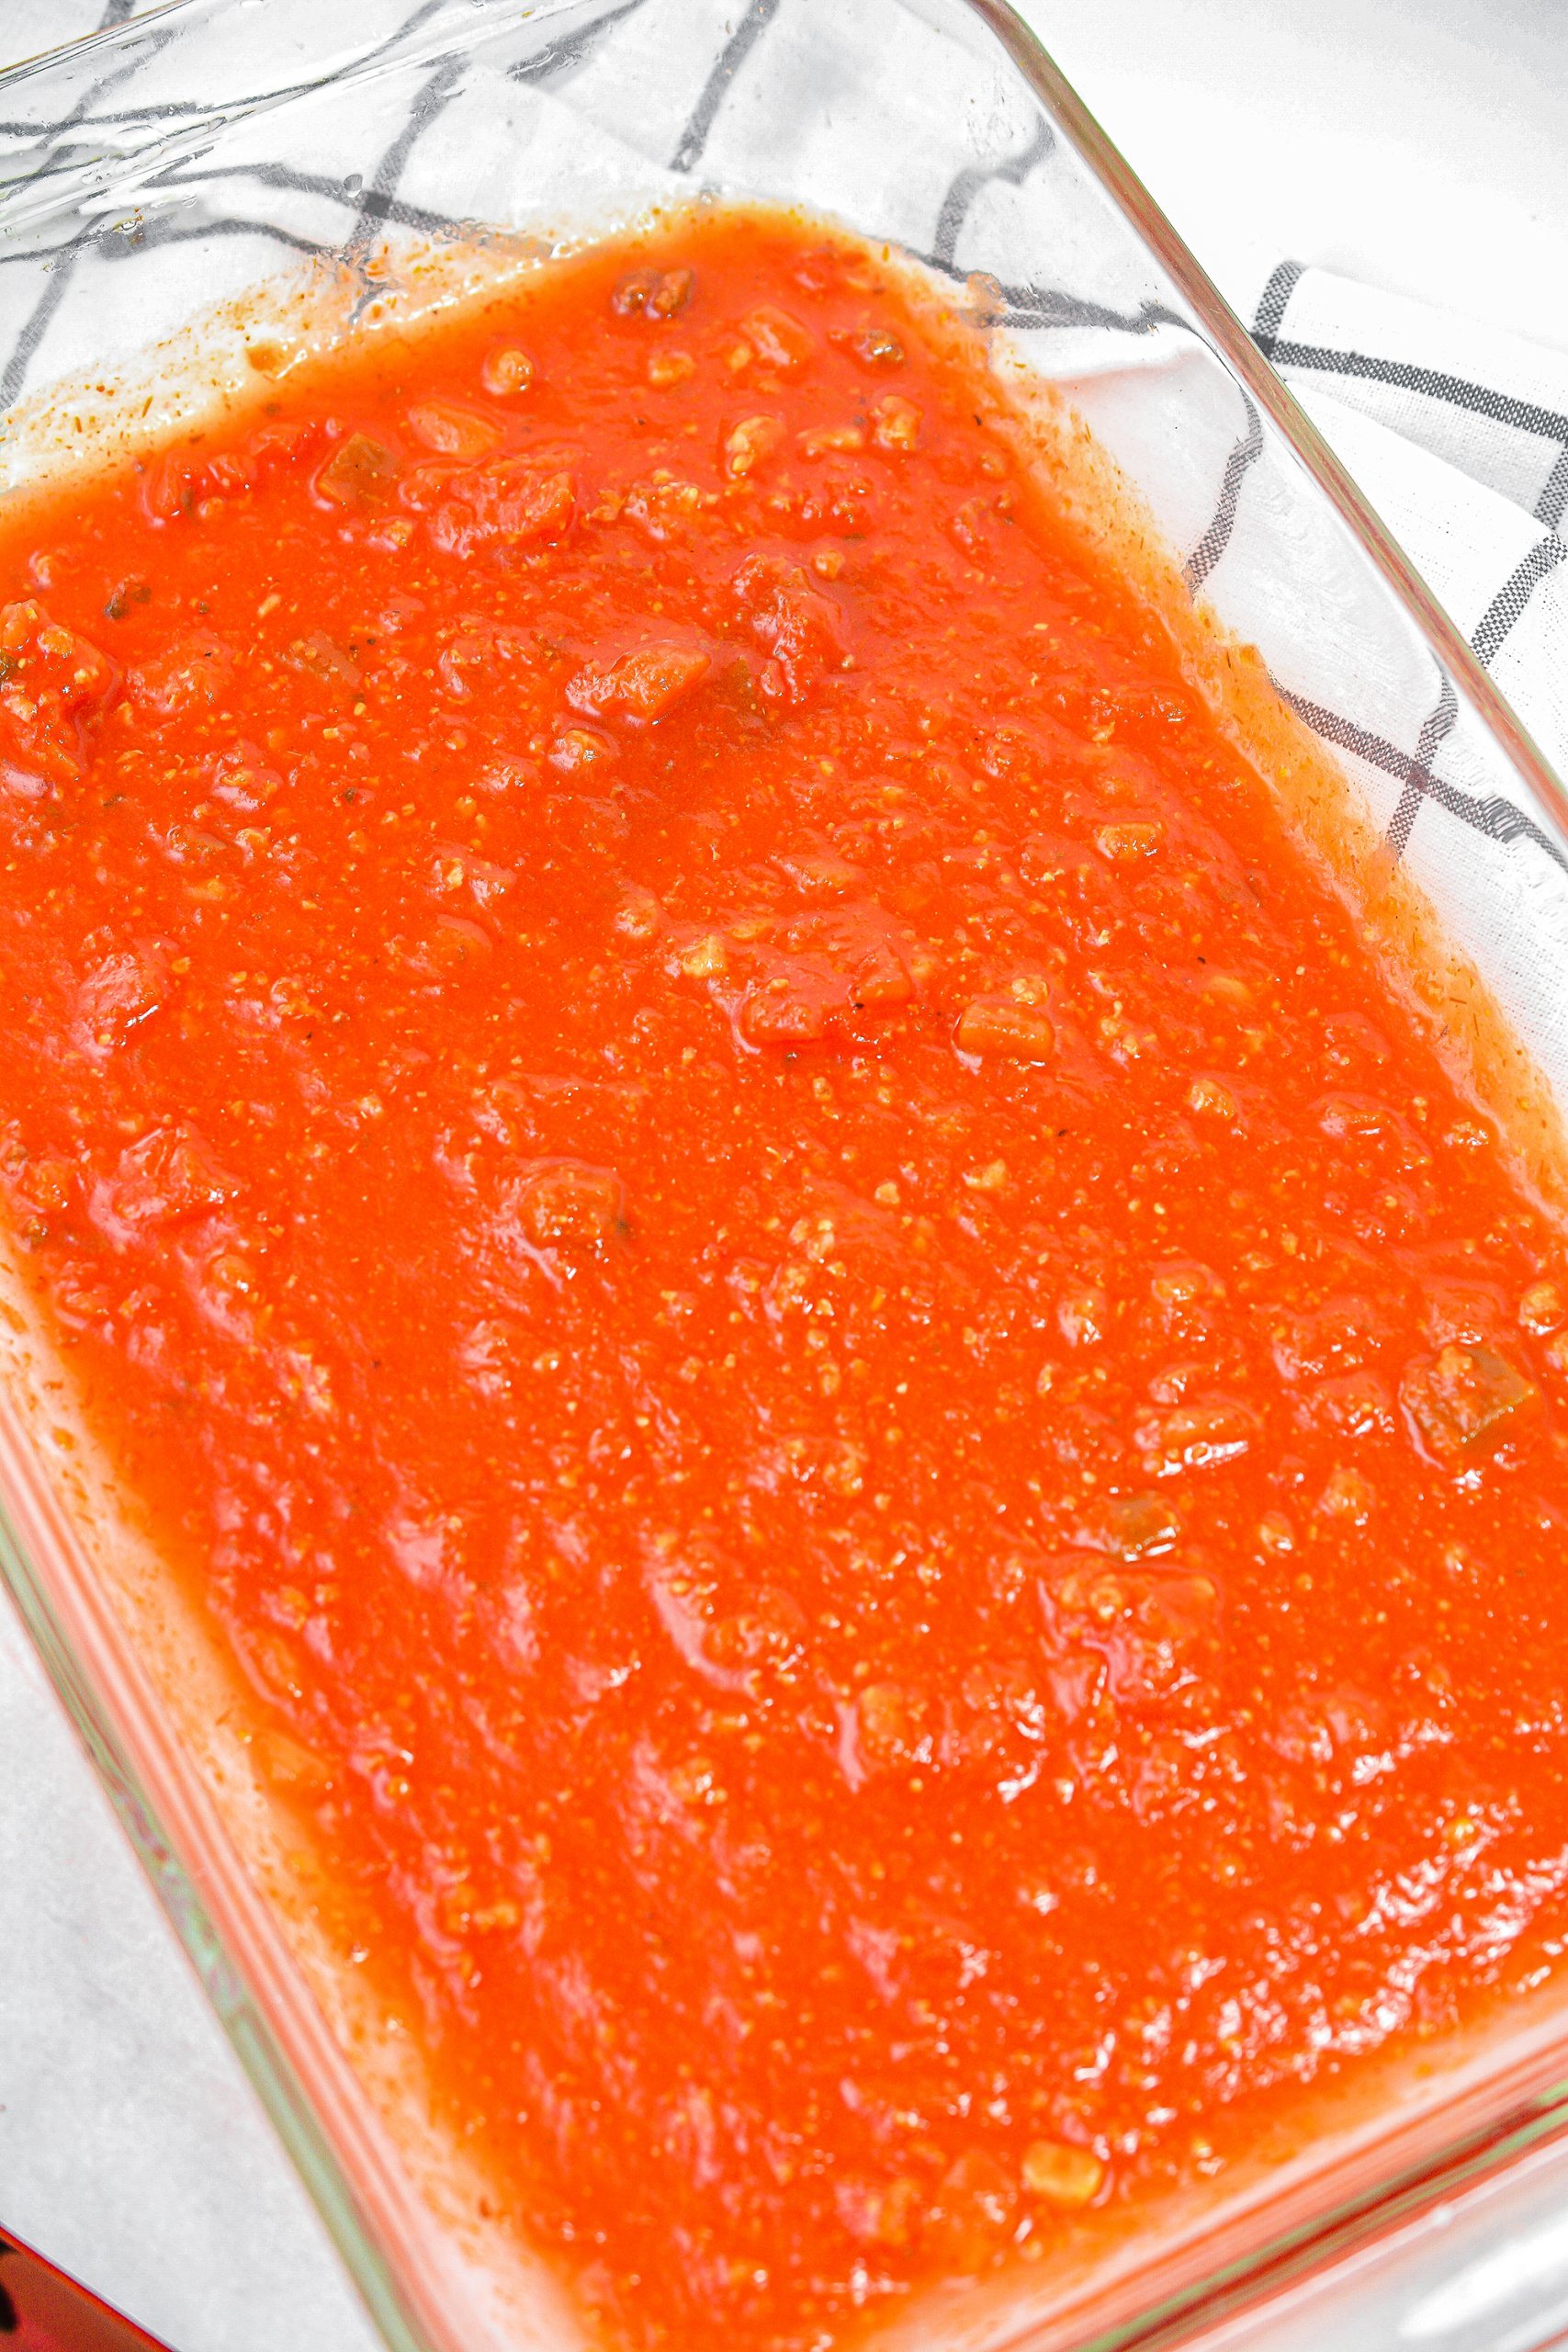 Layer 1 cup of spaghetti sauce in the bottom of a 9x13 baking dish.